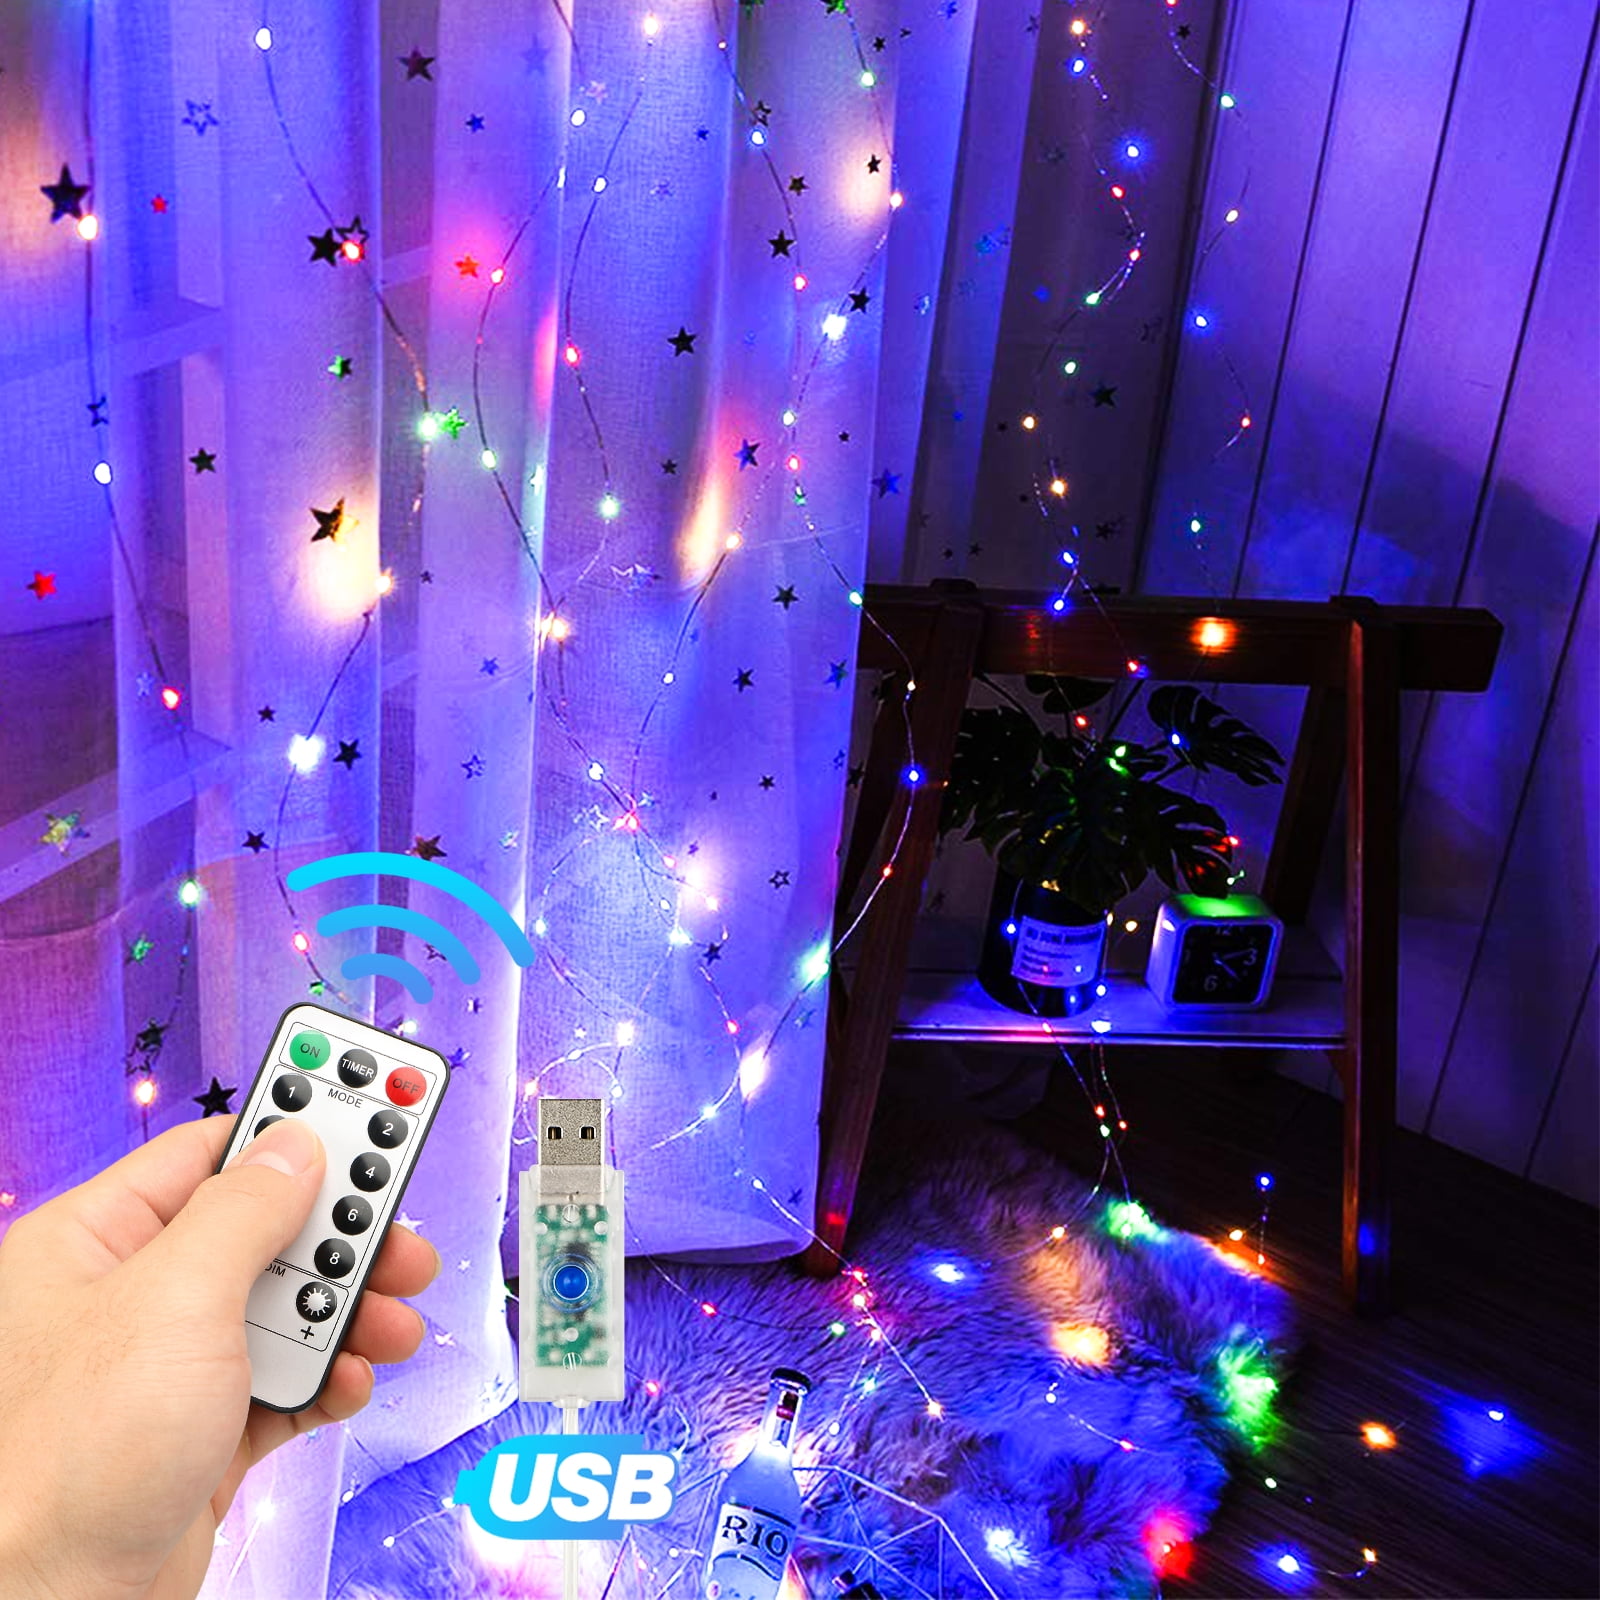 300LED USB Curtain Lamp Fairy String Lights Wedding Party Decor w/Remote Control 